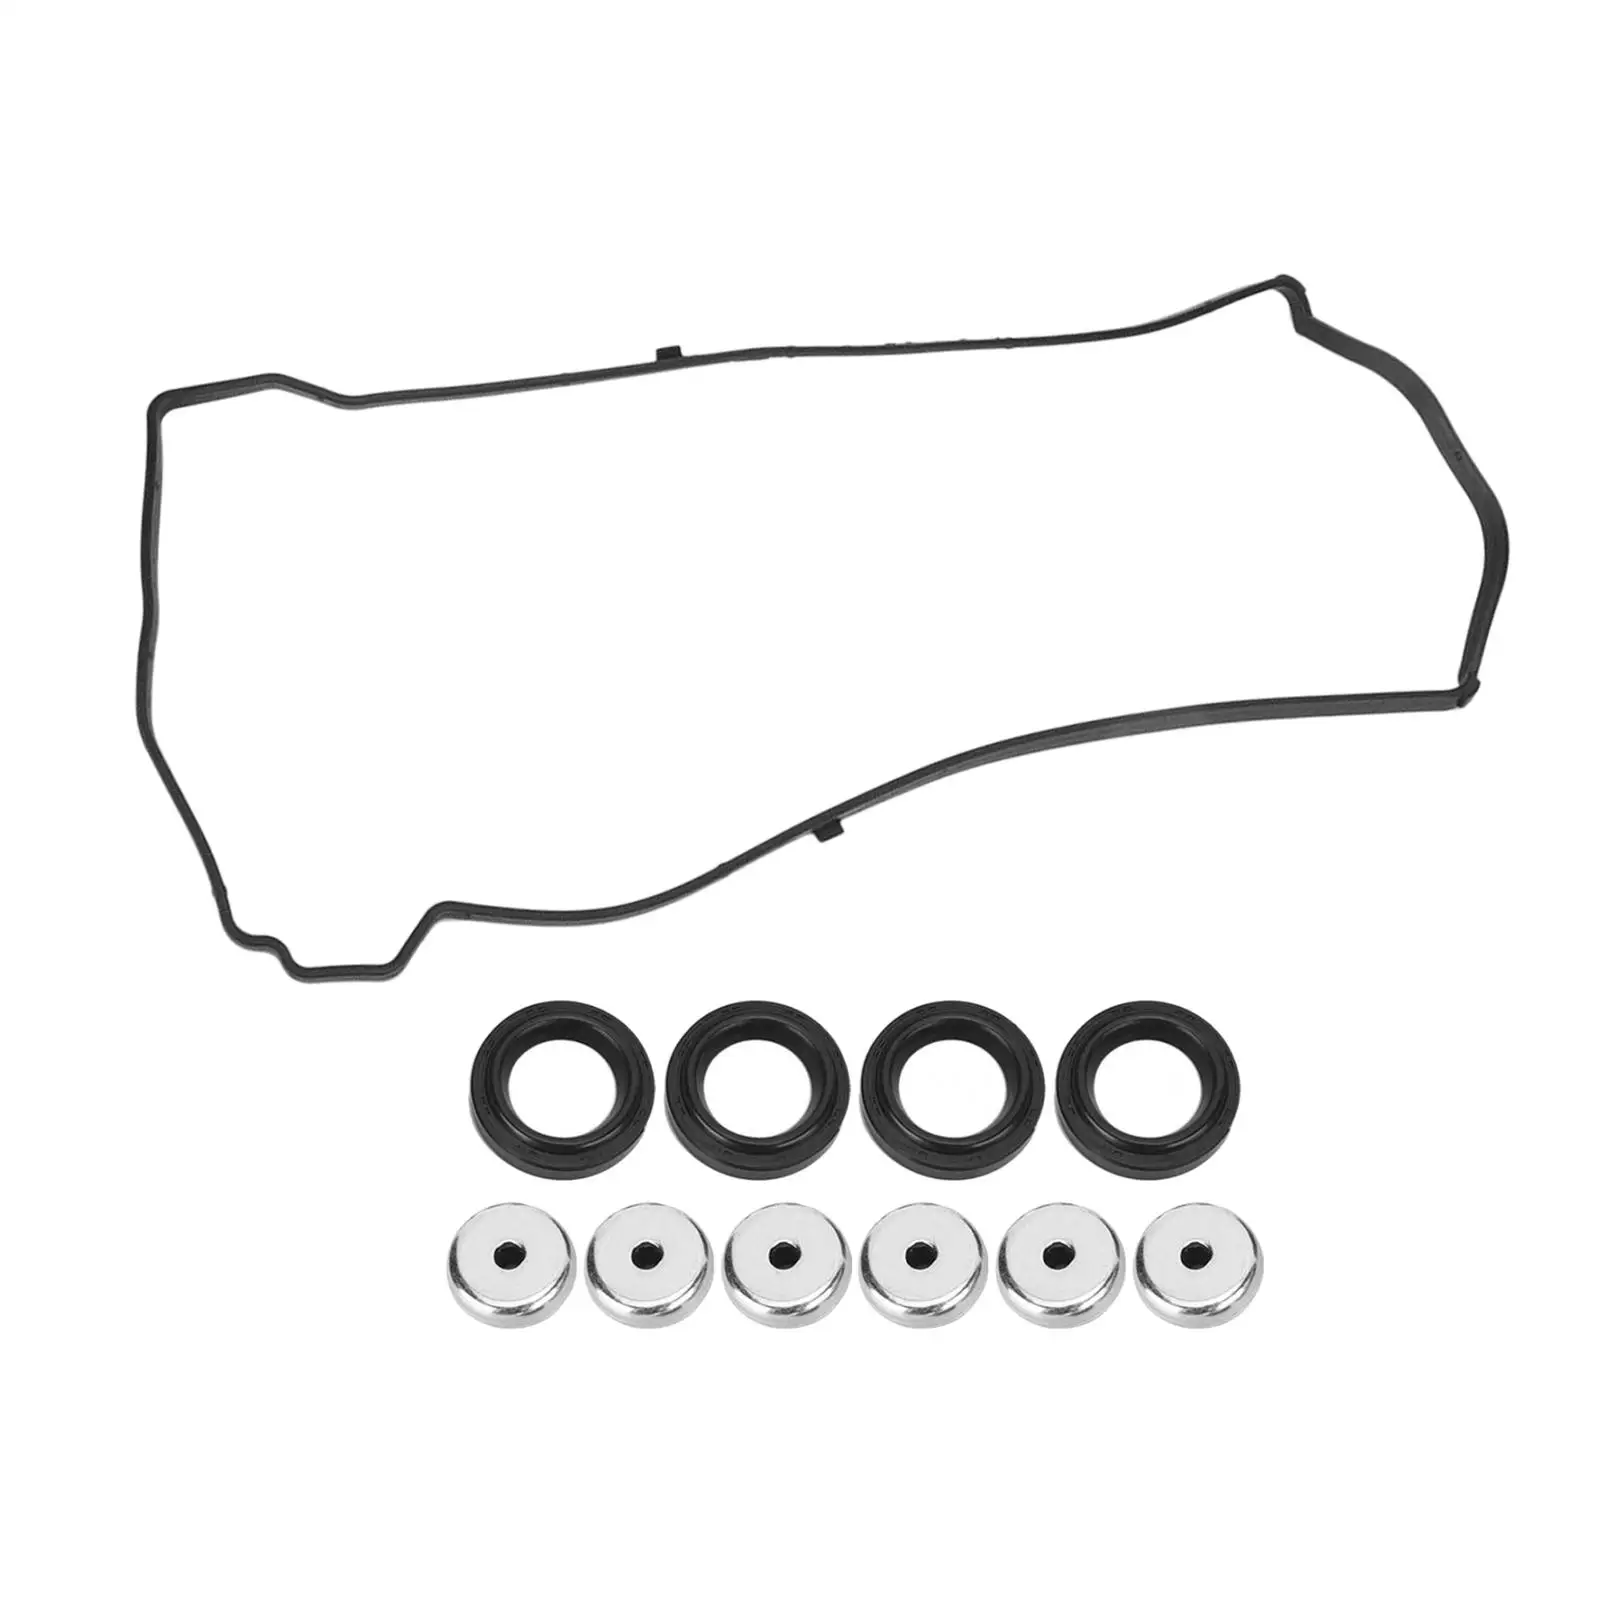 Valve Cover Gasket Seal 12030-pnc-000 12030pnc000 Replaces Durable Replacement Parts for Honda Acura RSX Tsx K20 K24 CRV